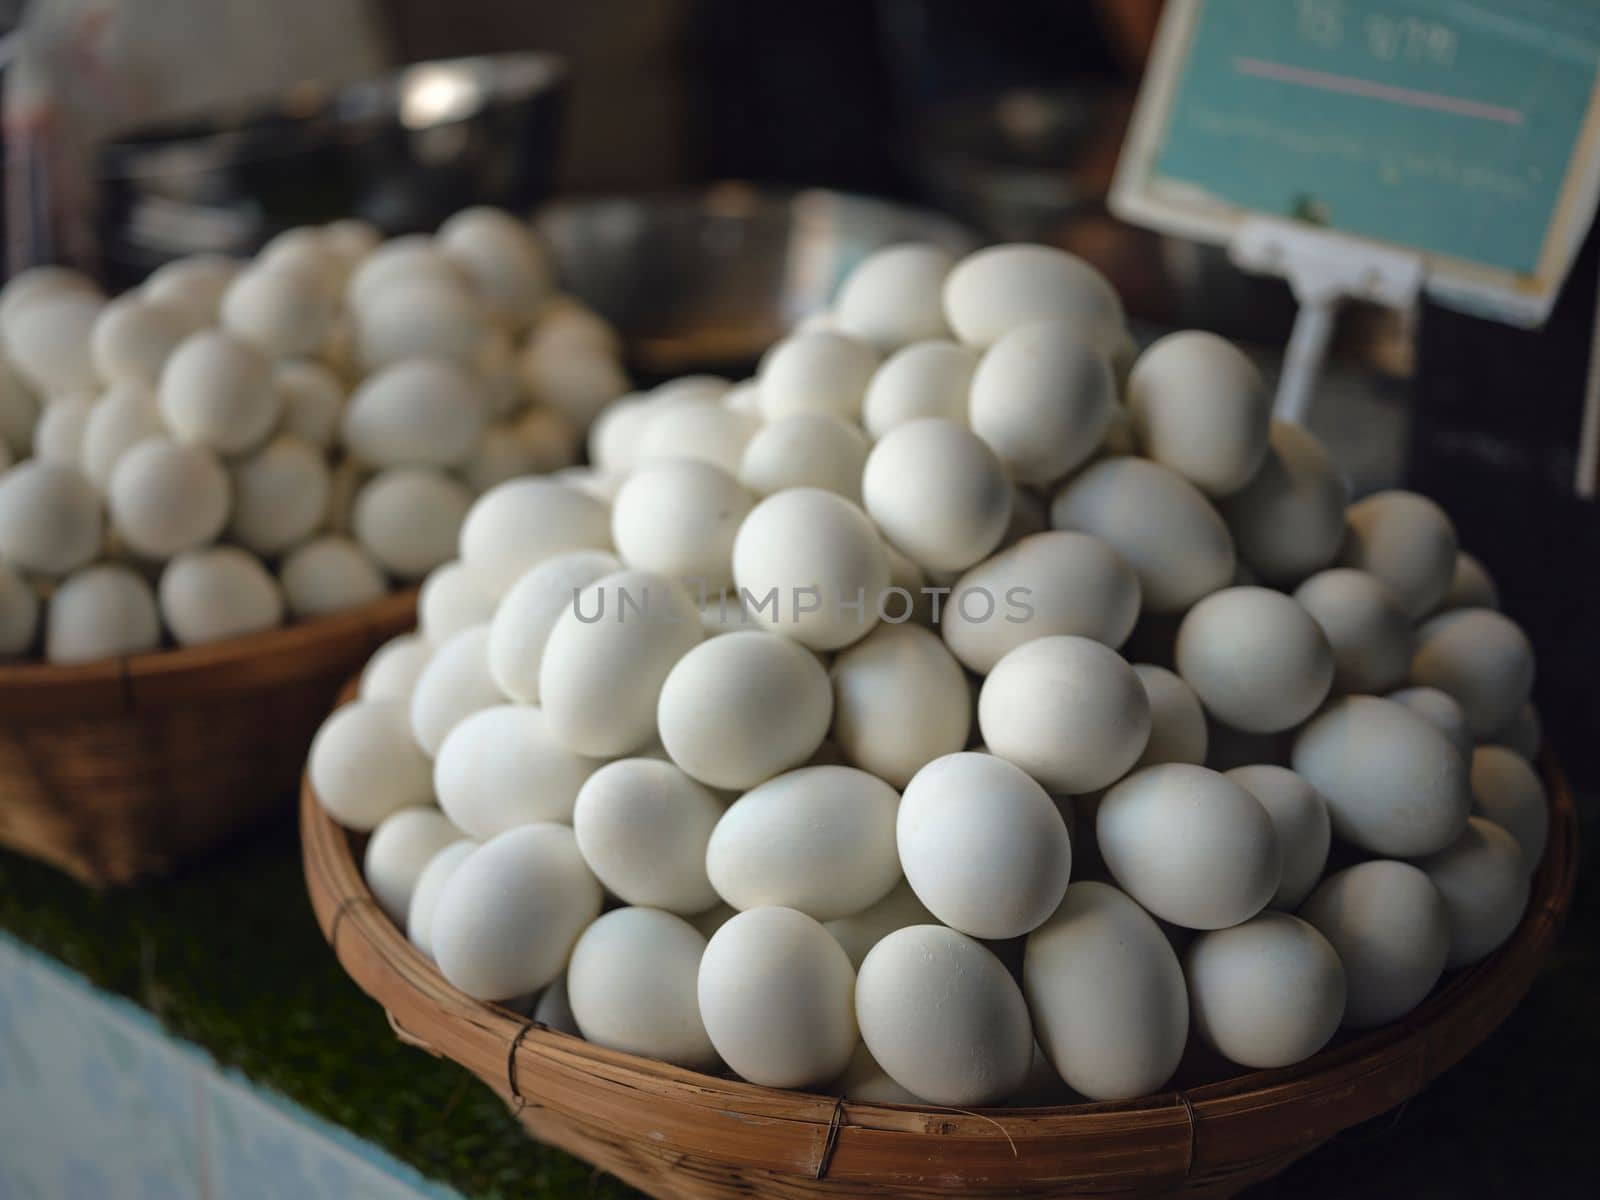 ORGANIC Salted eggs in the market in Thailand by Hepjam